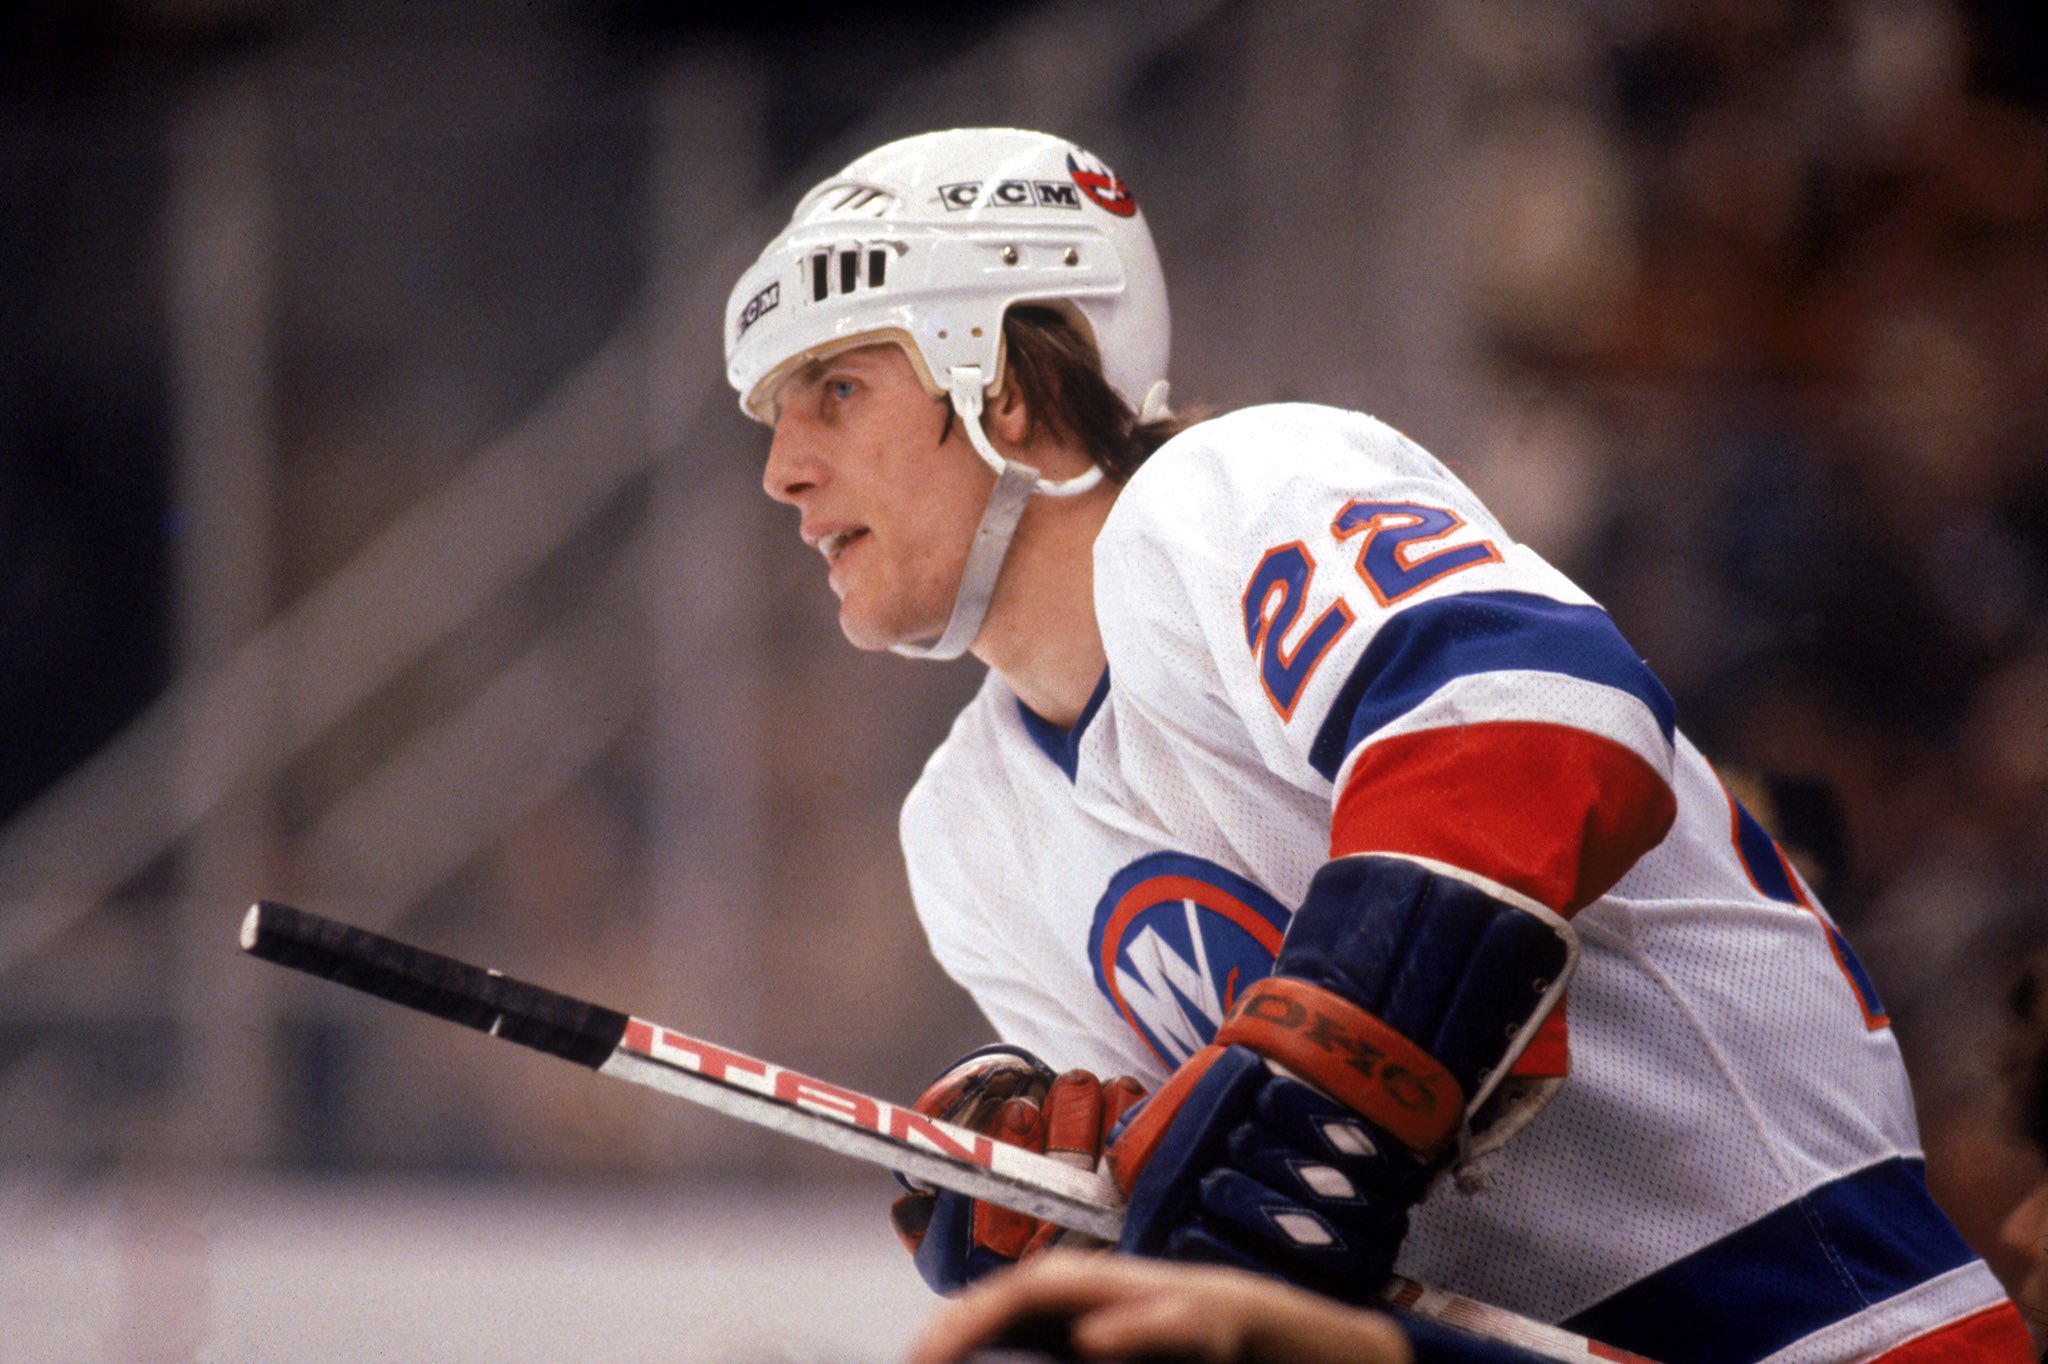  messages: Wishing a very happy birthday to legend Mike Bossy!  